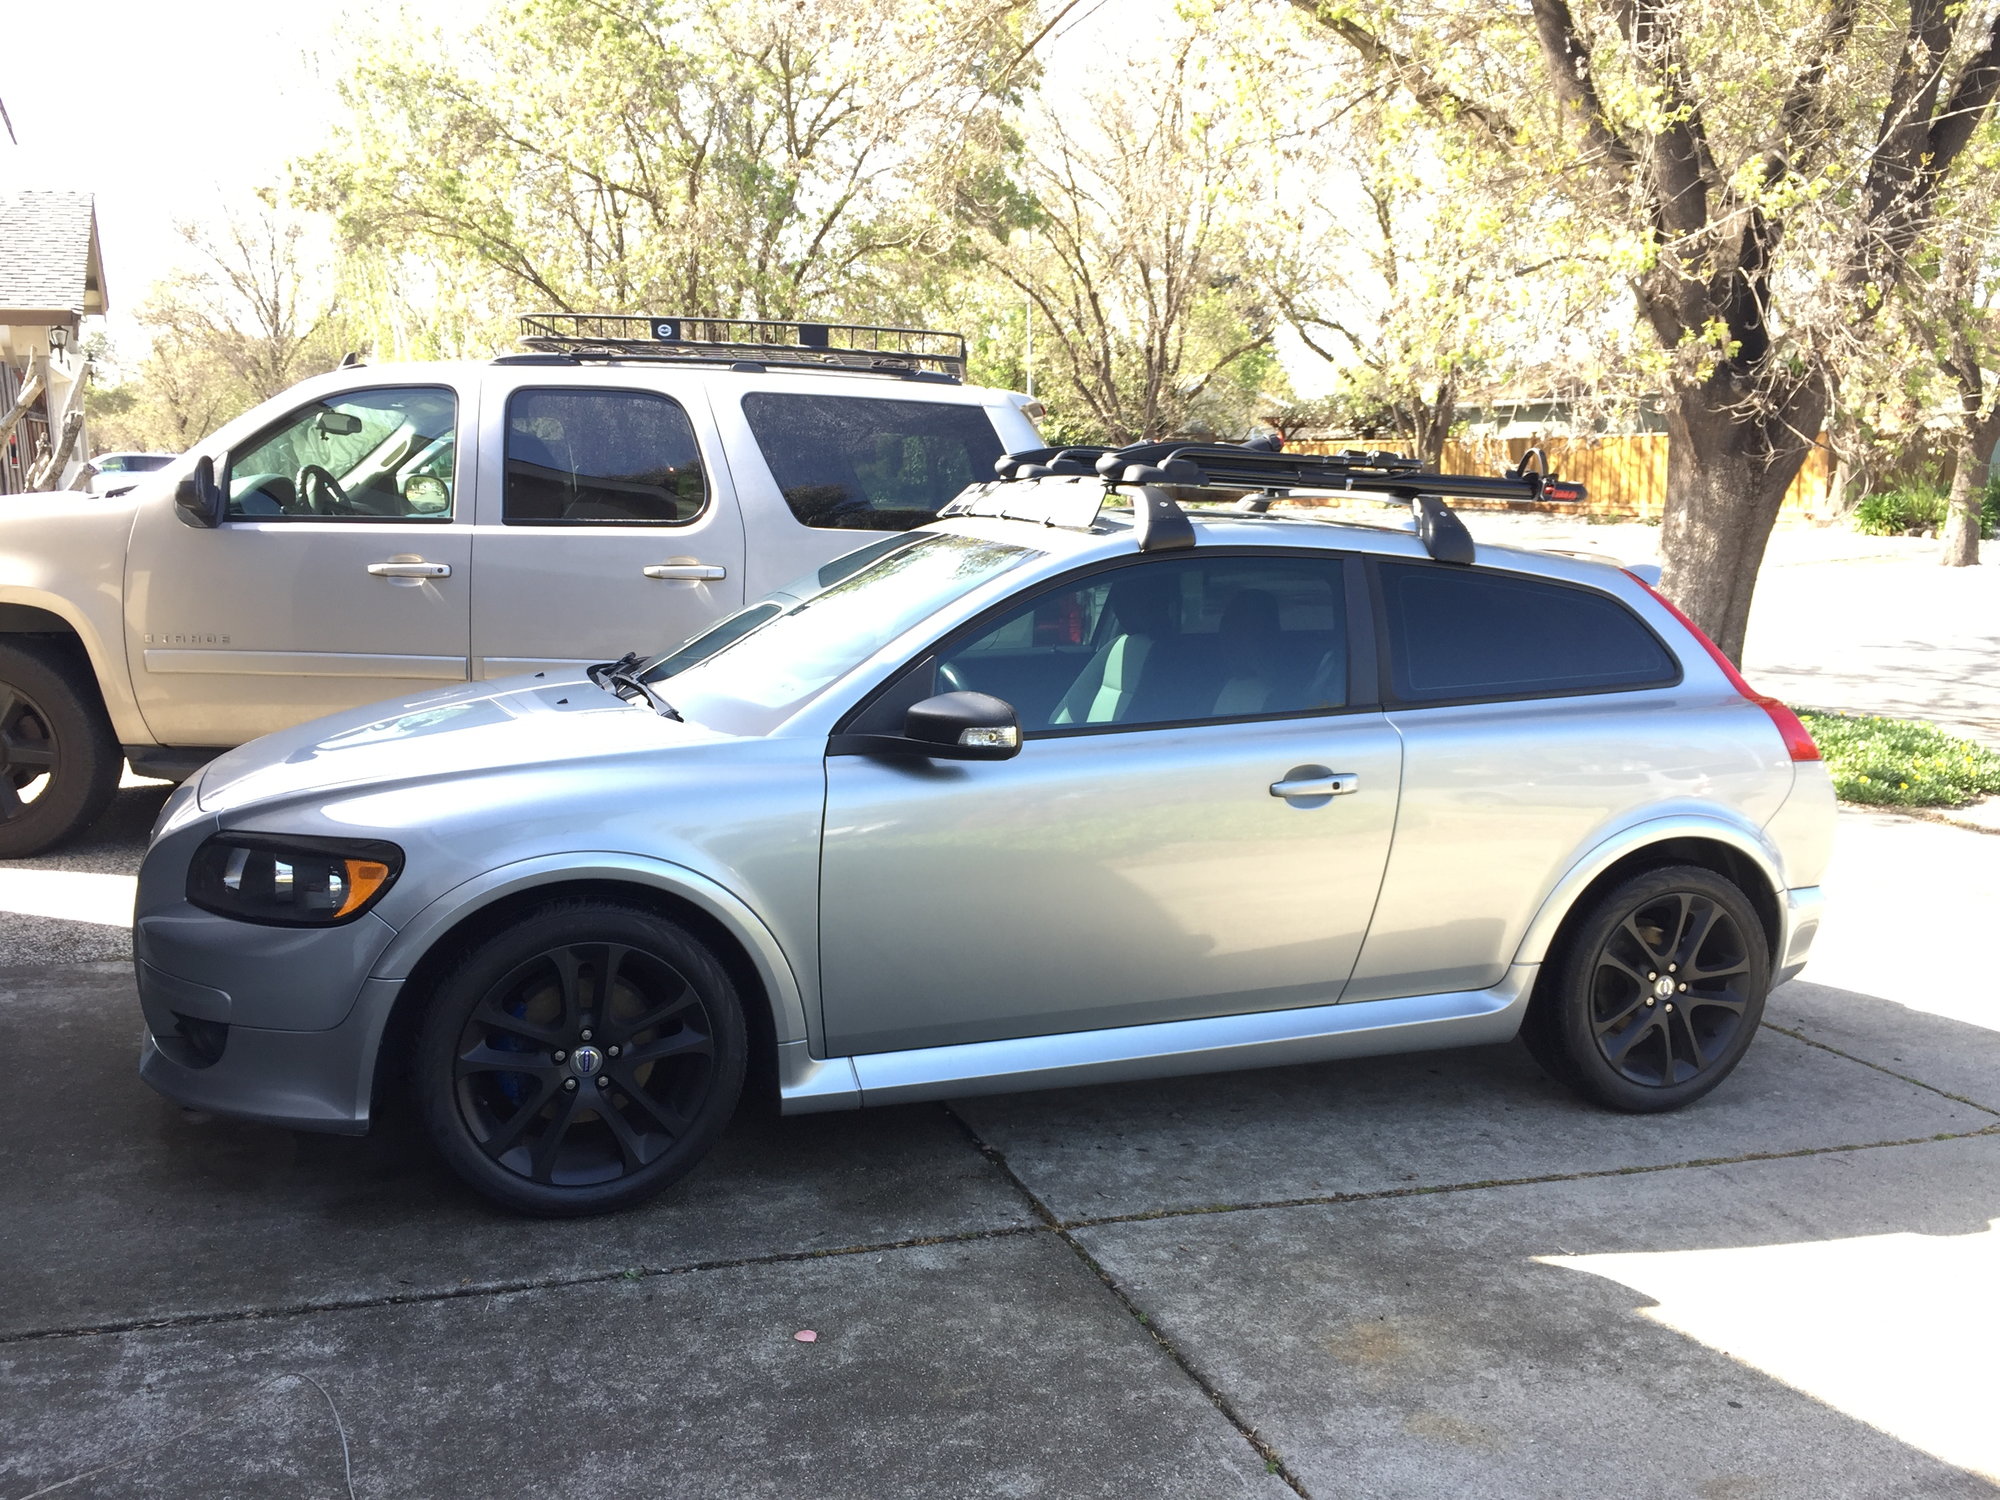 Volvo C30 Thule Rapid Traverse Silver Aeroblade Roof Rack 08 13 By Rack Outfitters Youtube